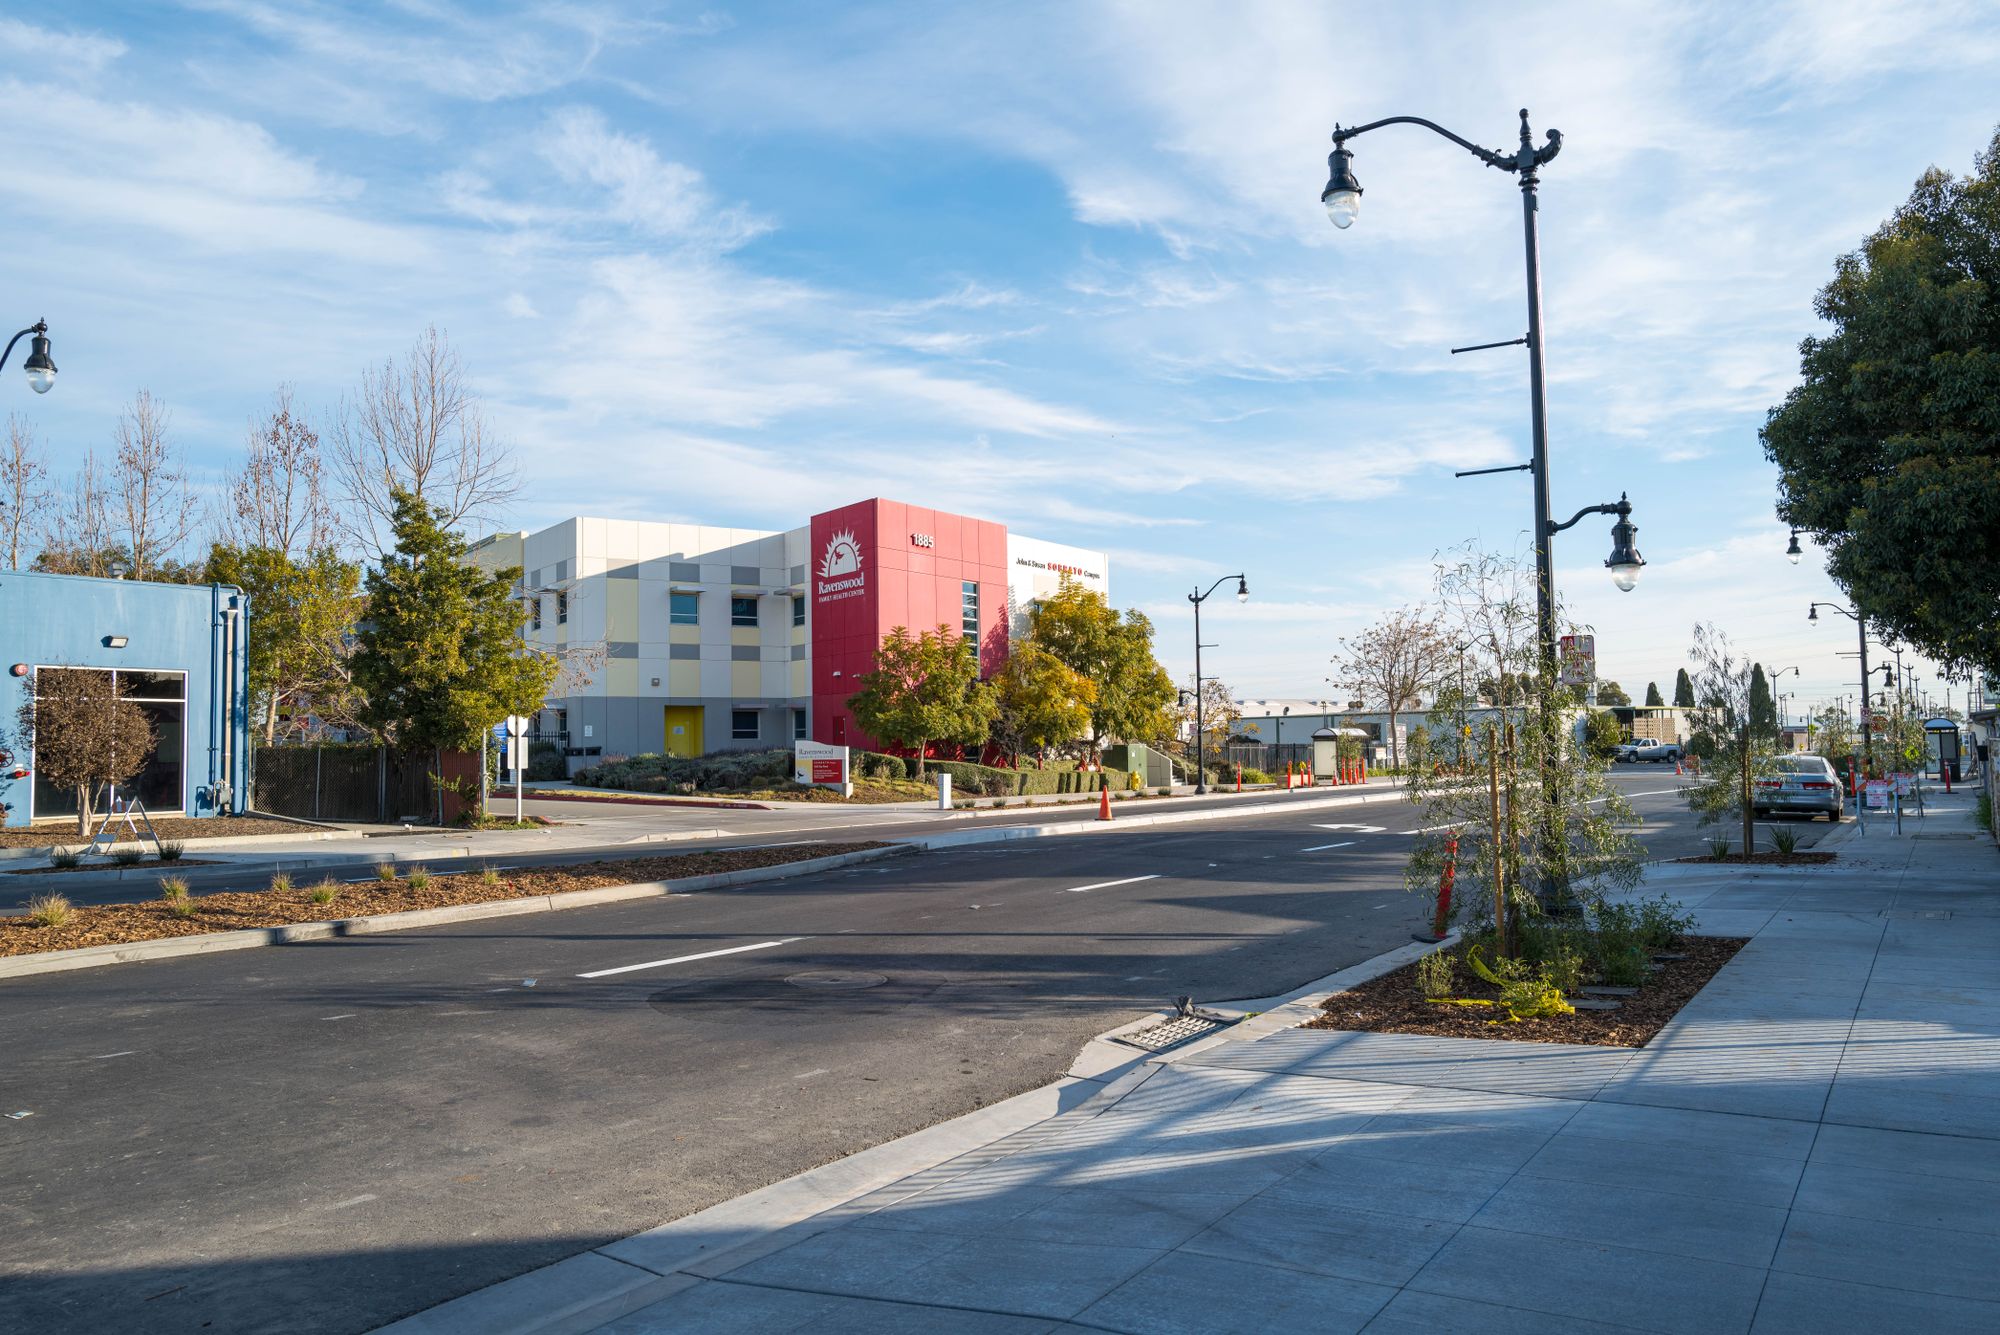 New Trees, Benches, Sidewalks, and Crosswalks on Bay Road in Ravenswood Business District